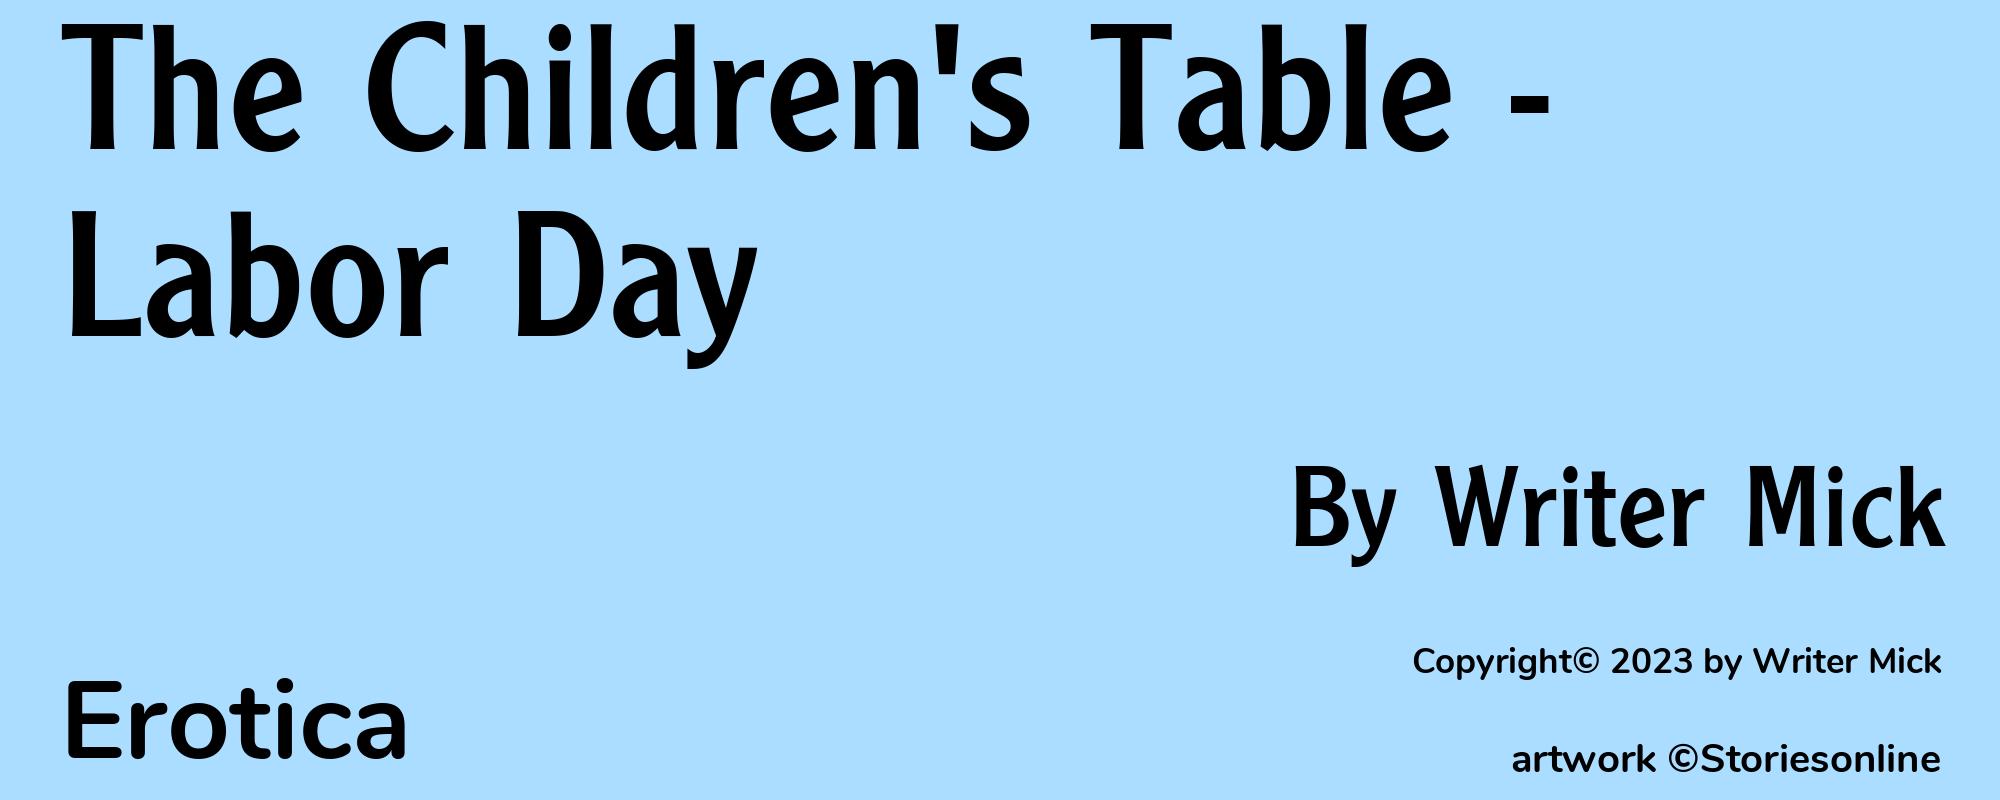 The Children's Table - Labor Day - Cover